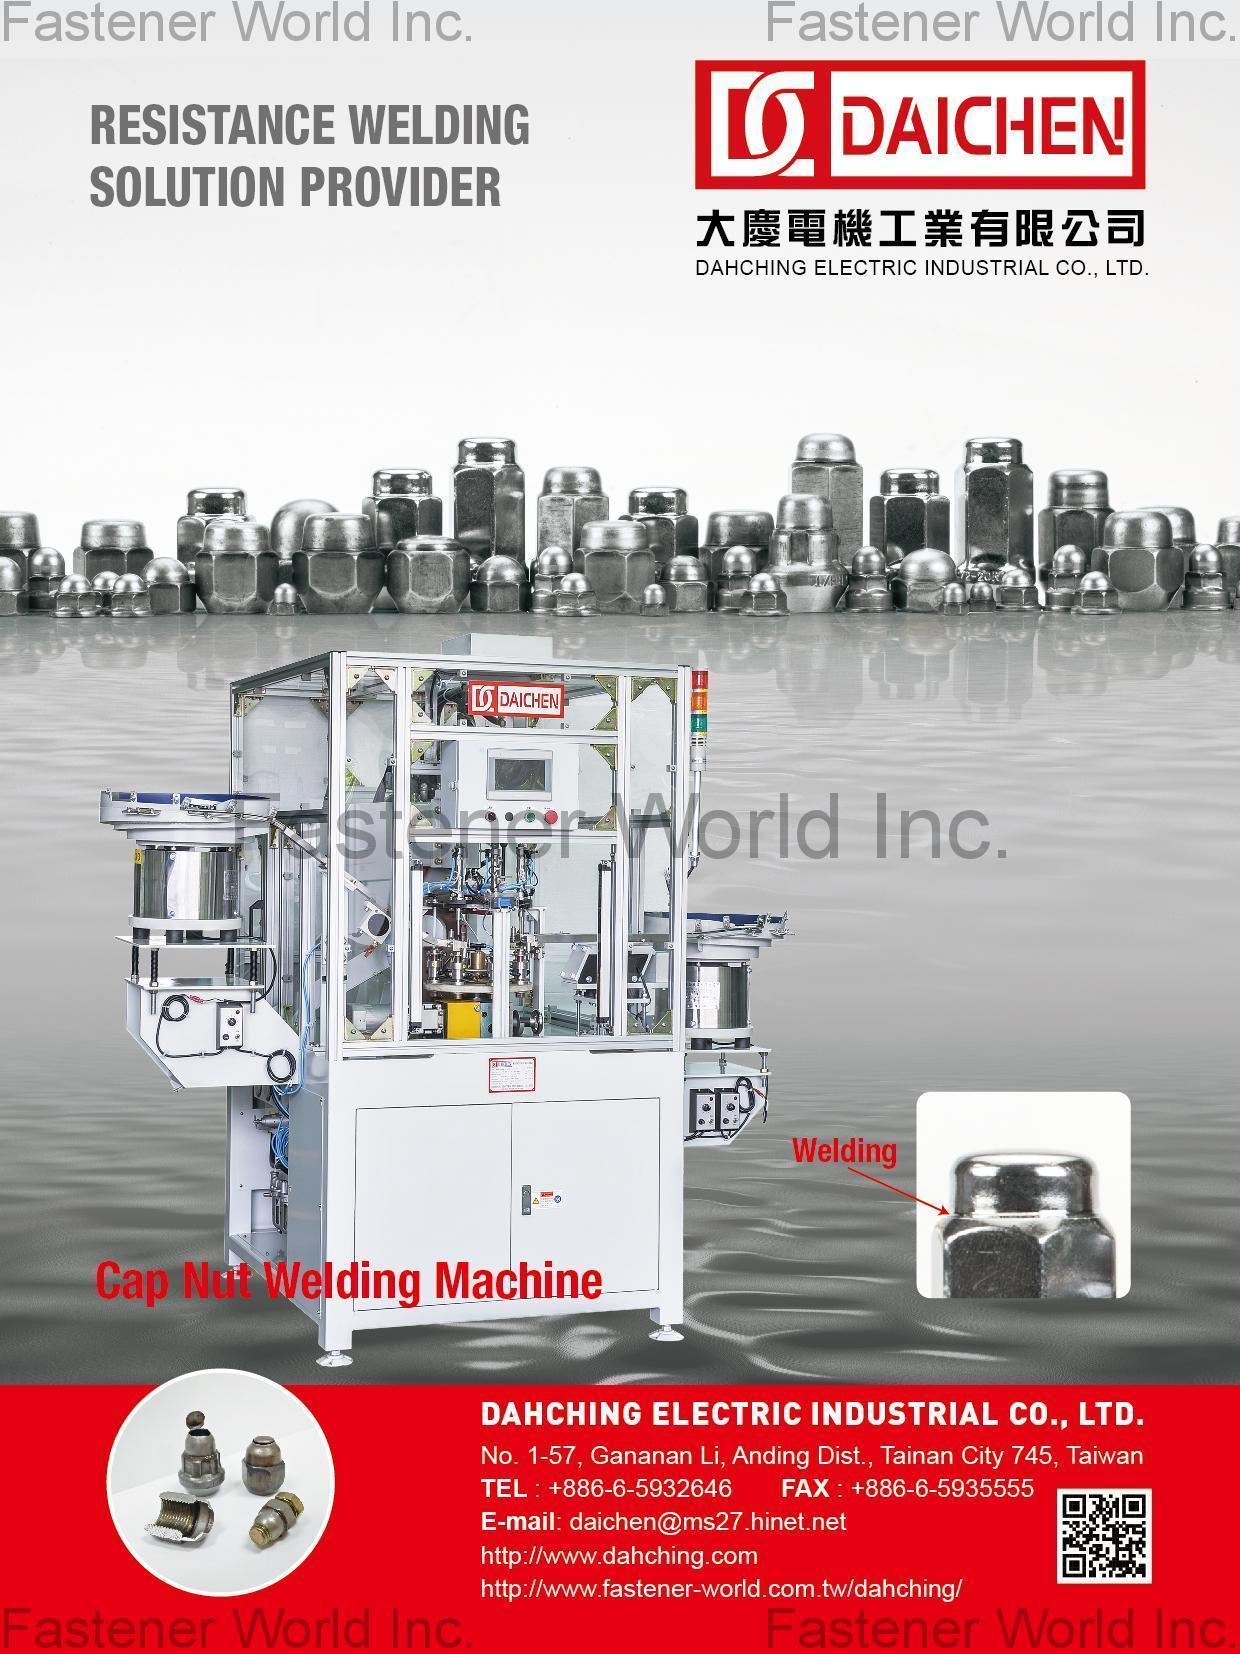 DAHCHING ELECTRIC INDUSTRIAL CO., LTD. ,  Dahching Electric Industrial Co., Ltd. is an experienced Welding Machine manufacturer specializing in customized production of Resistance Welding Machines for custom applications such as:Cap Nut Welding Machine, Grating Welding Machine, Spot Welding Machine, Projection Welding Machine, Seam Welding Machine, Flash Butt Welding Machine / Butt Welding Machine , Welding Machines